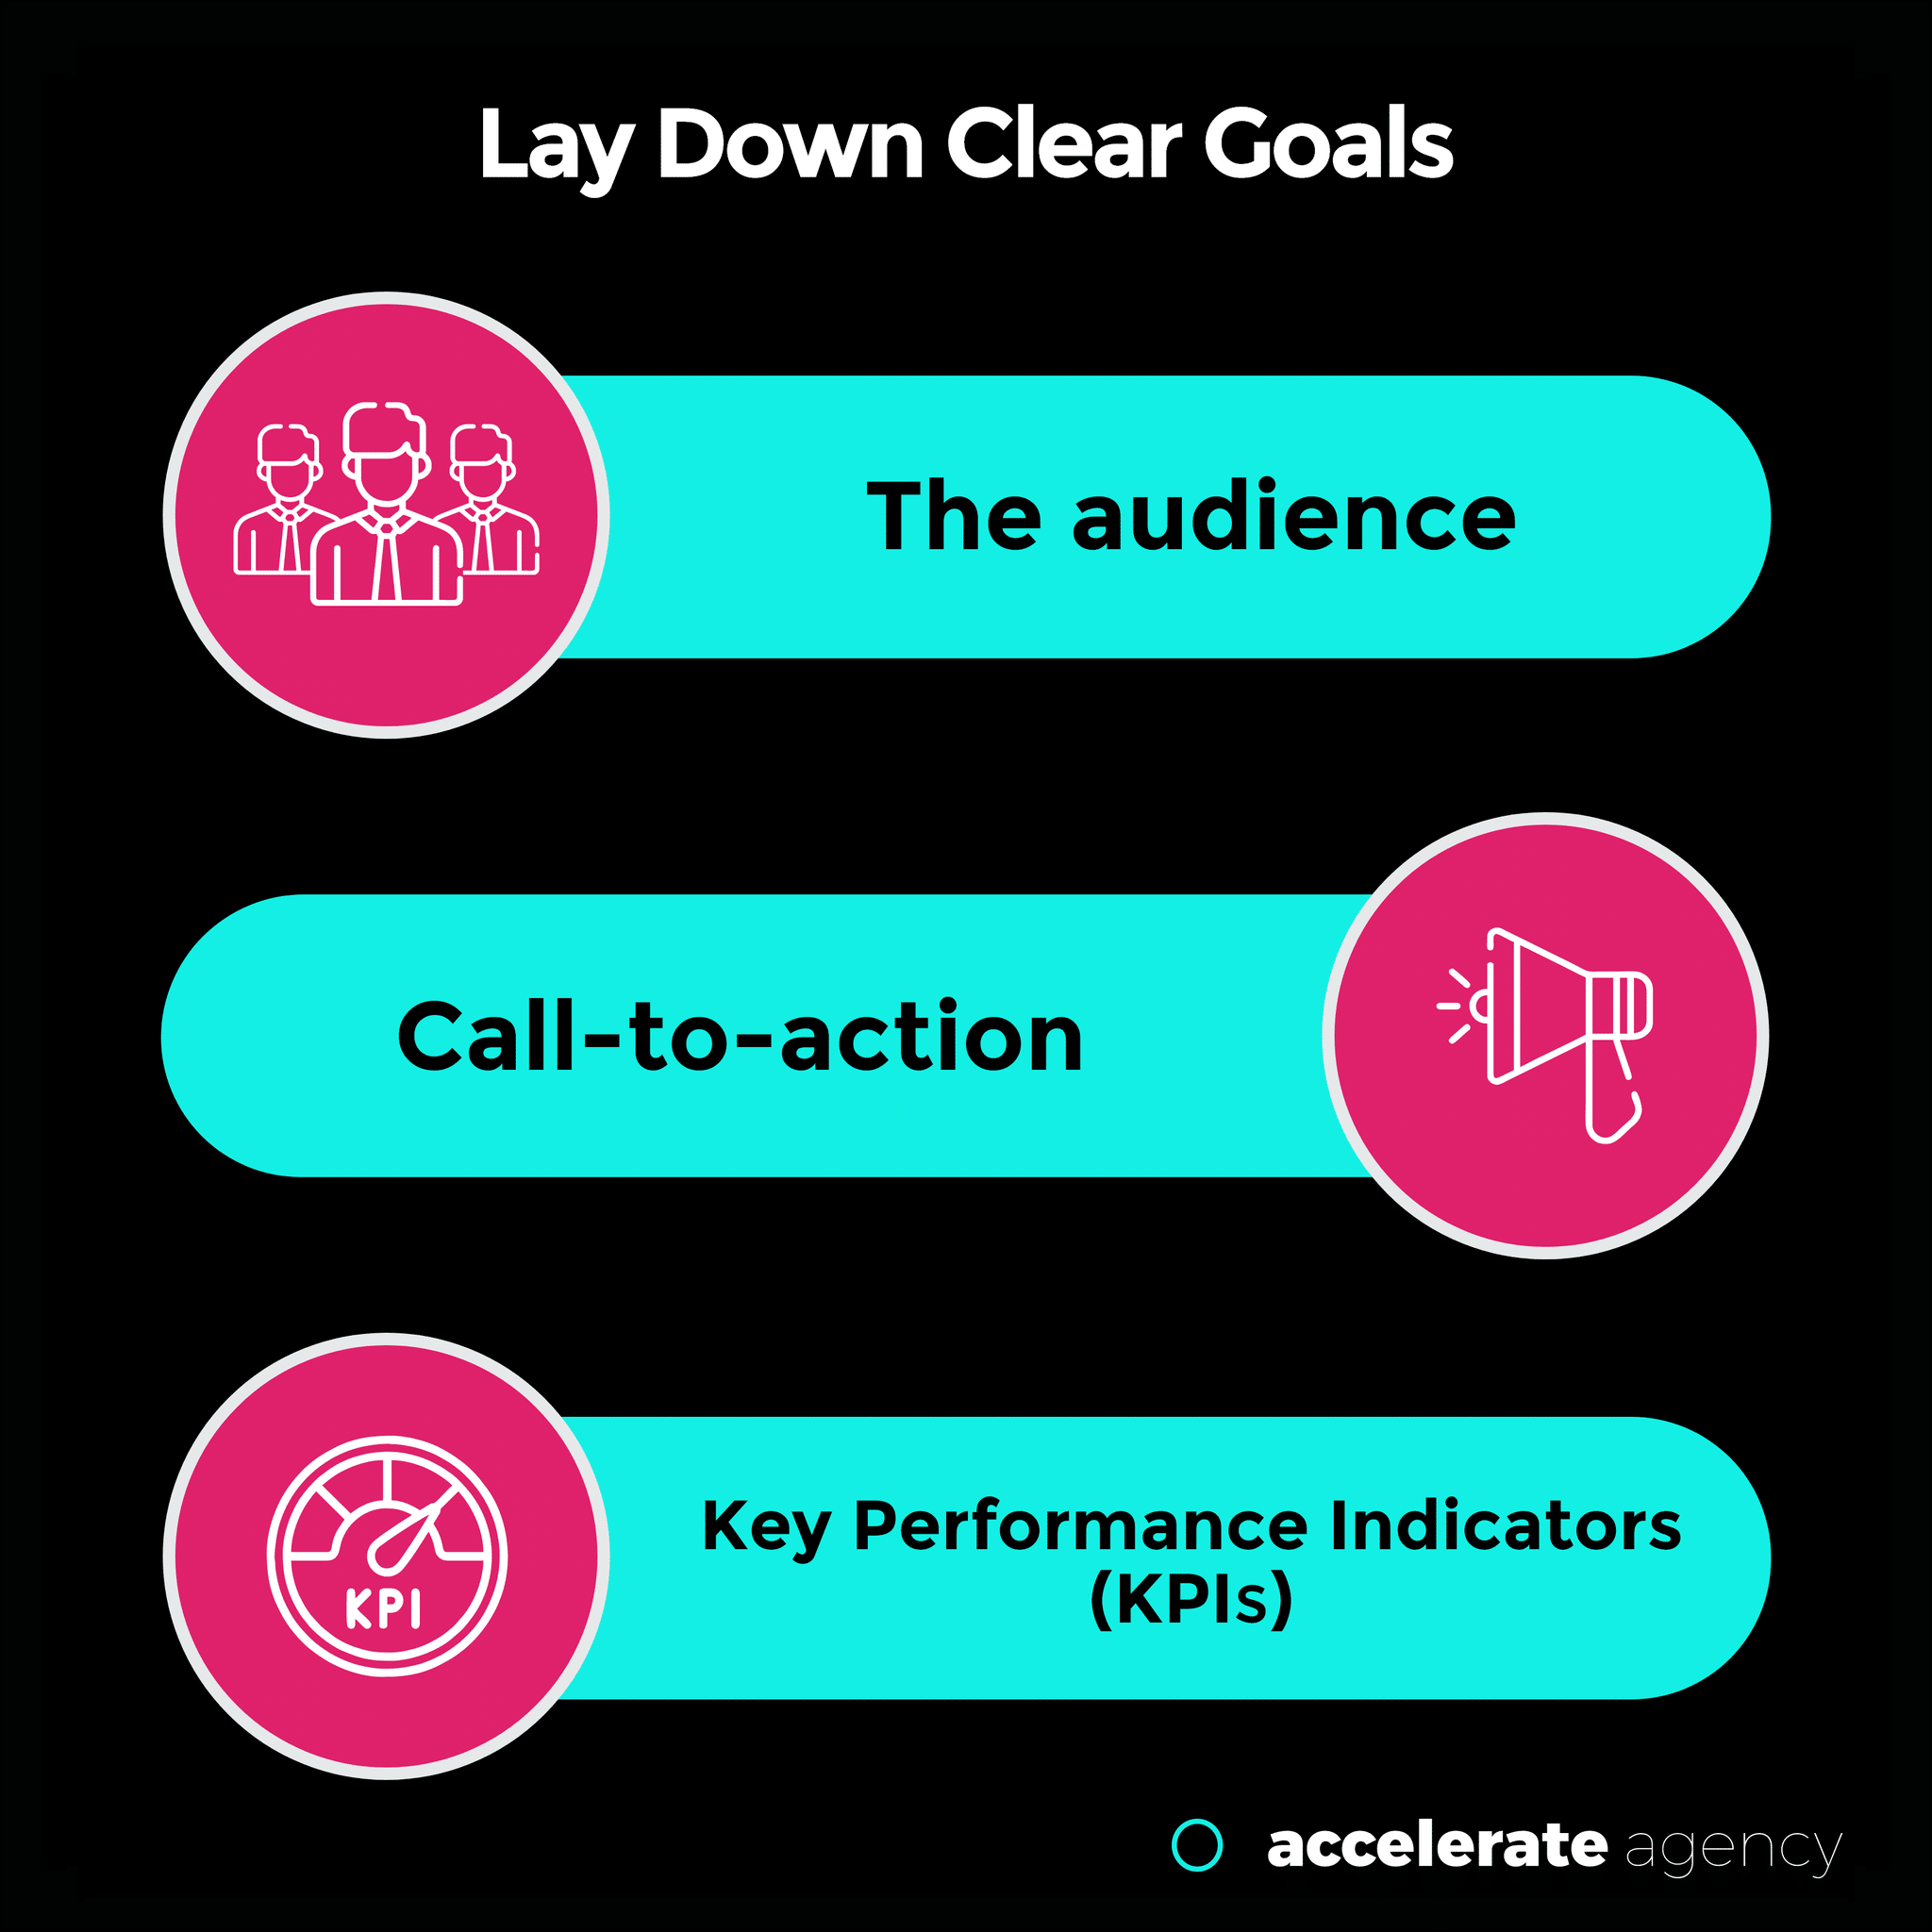 lay down clear goals - email marketing